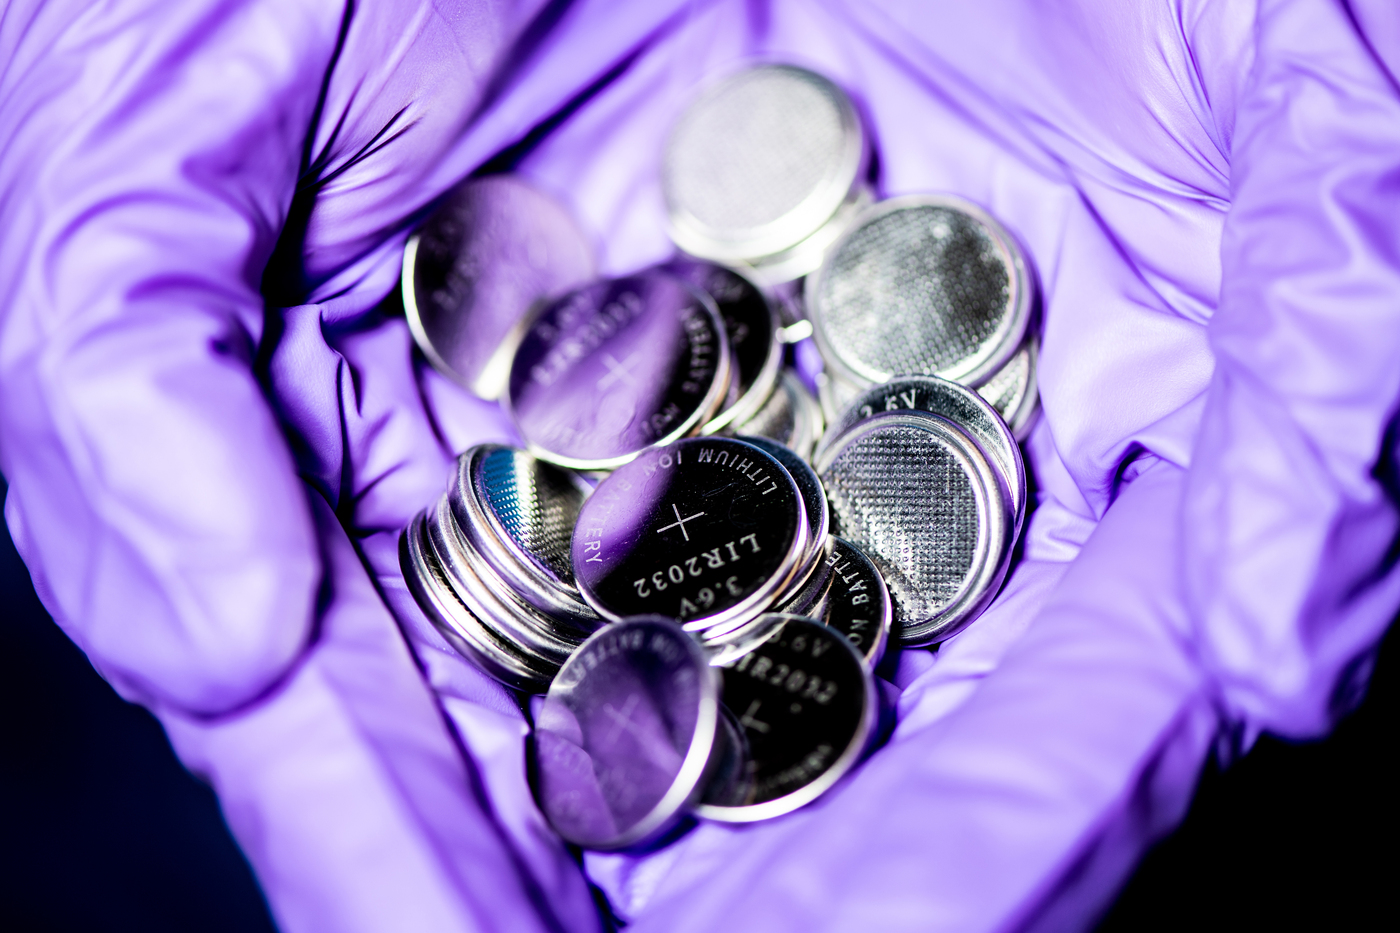 close up image of batteries in a purple gloved hand